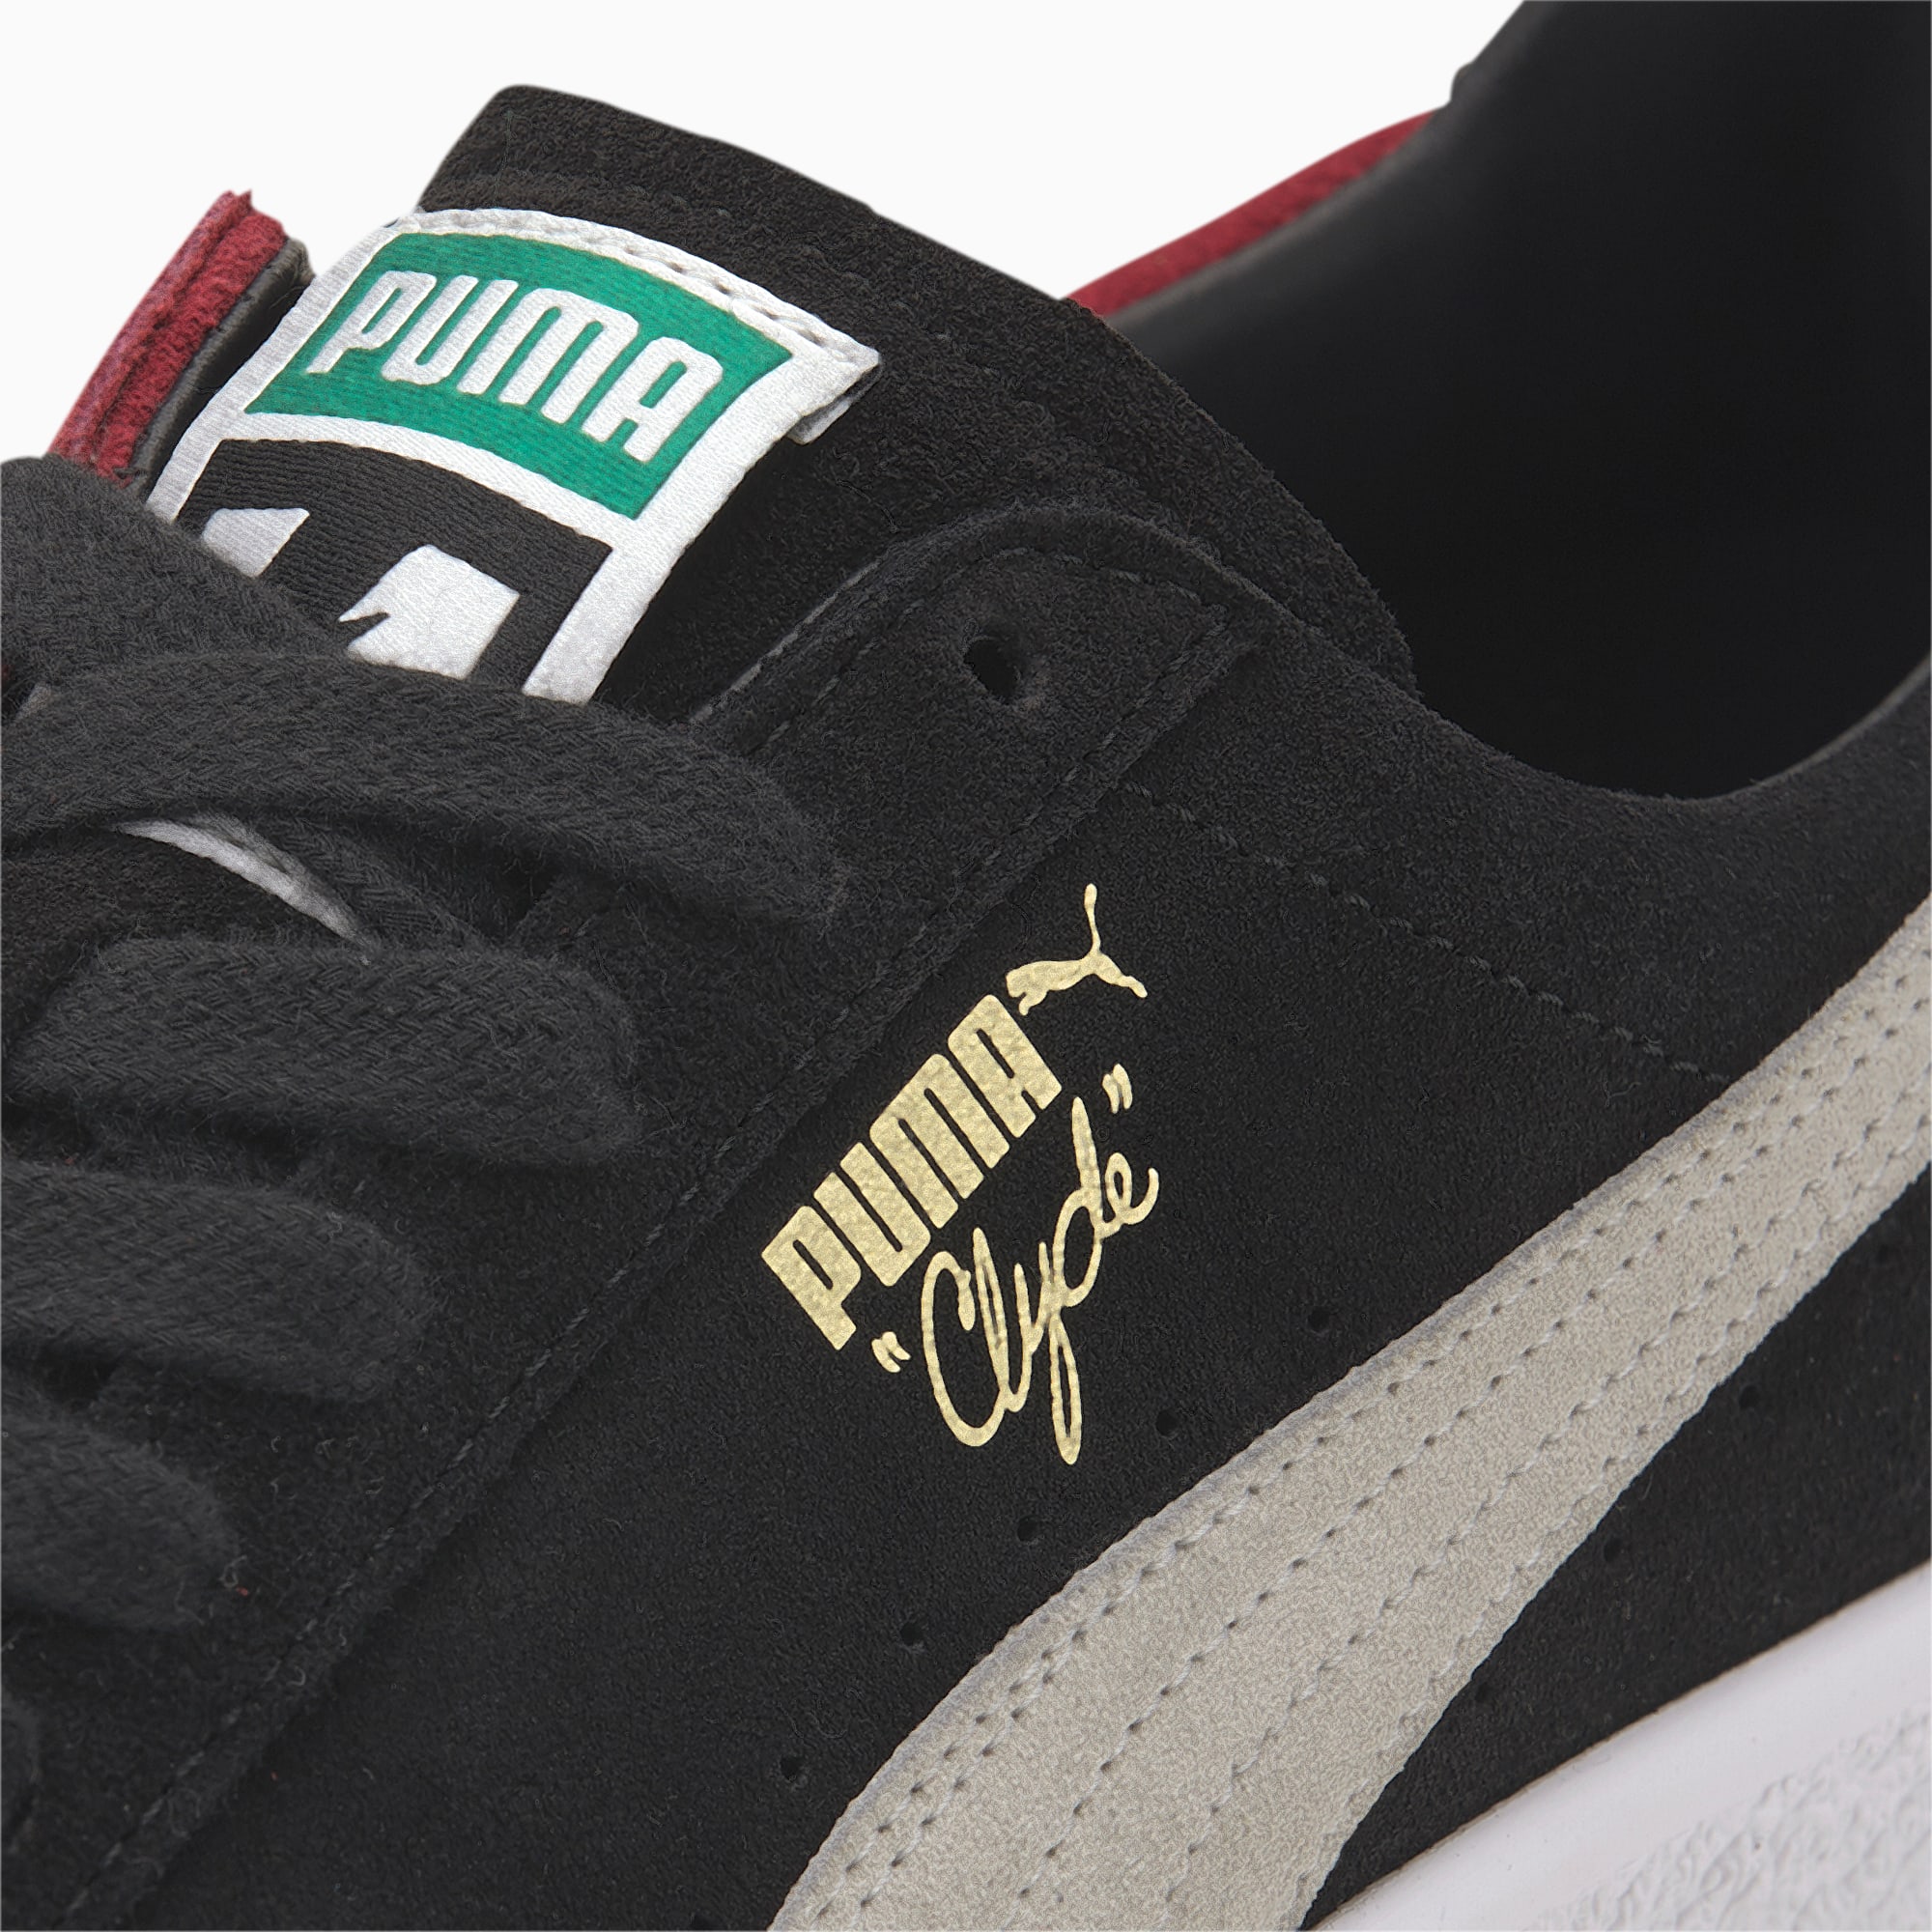 PUMA x THE HUNDREDS Clyde Men's Sneakers